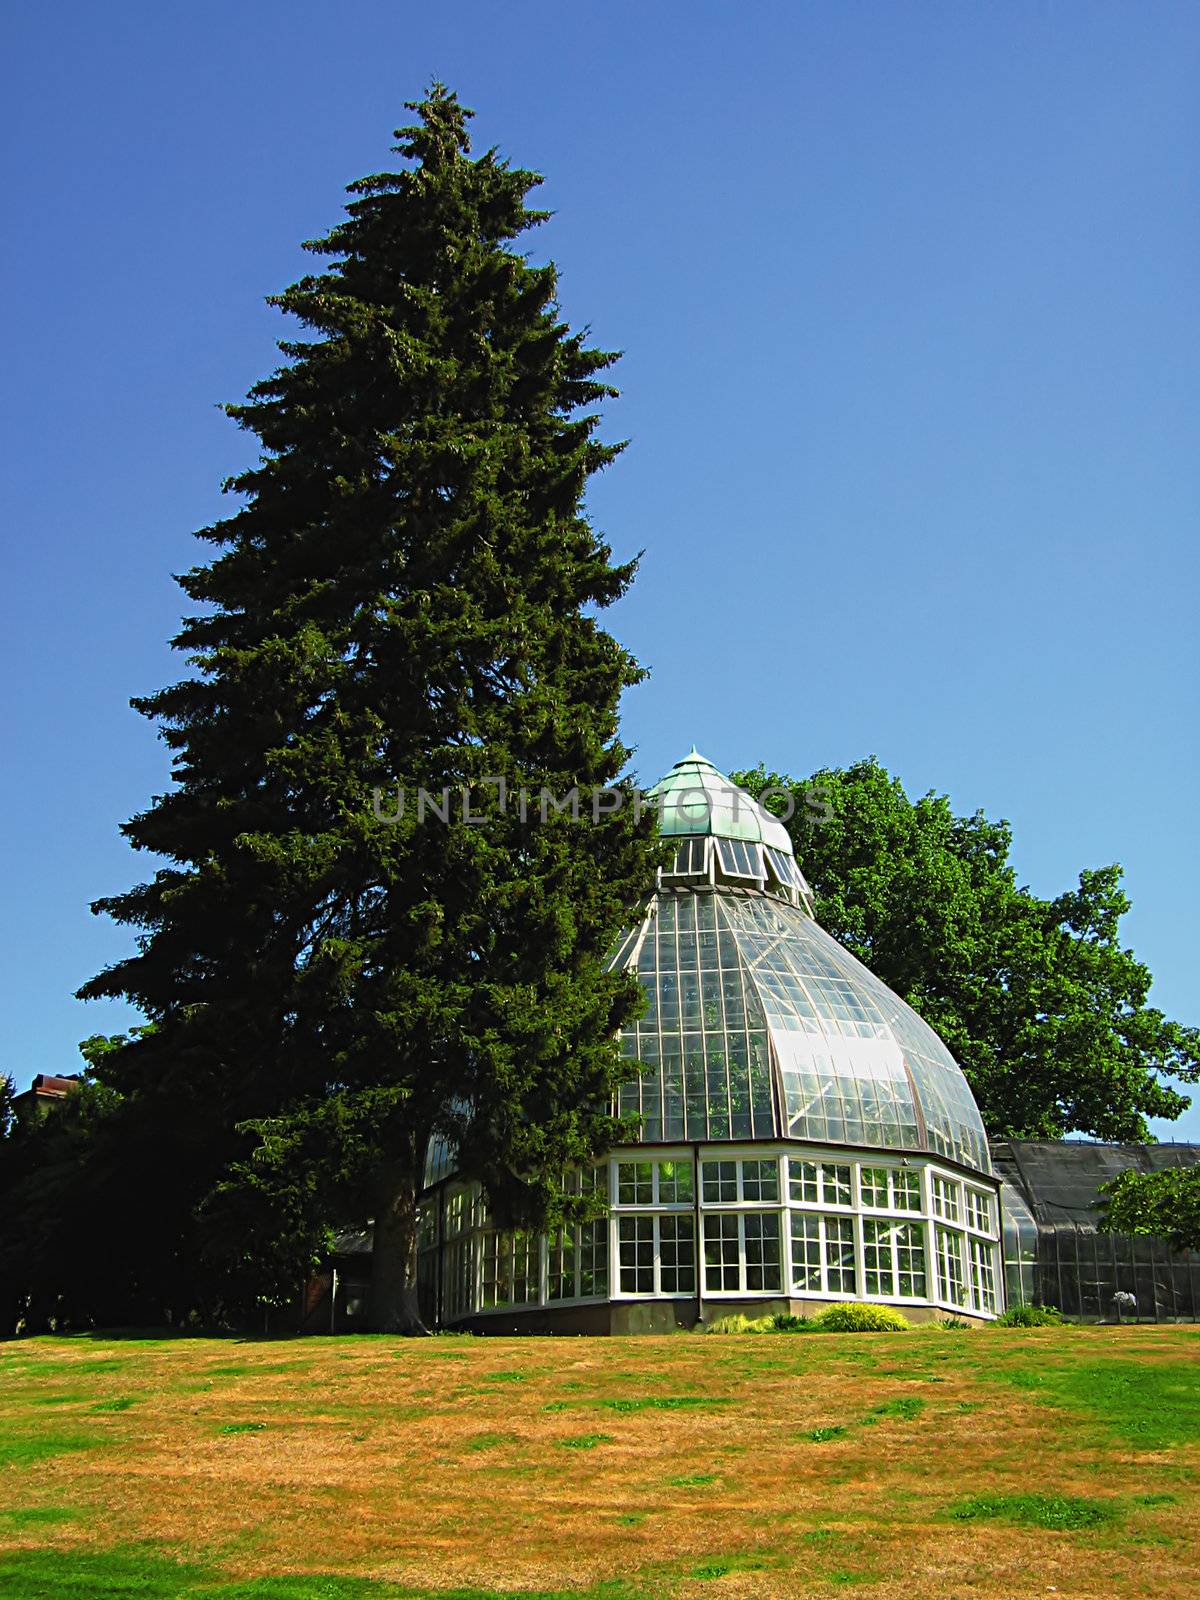 A photograph of a greenhouse located in a public park.